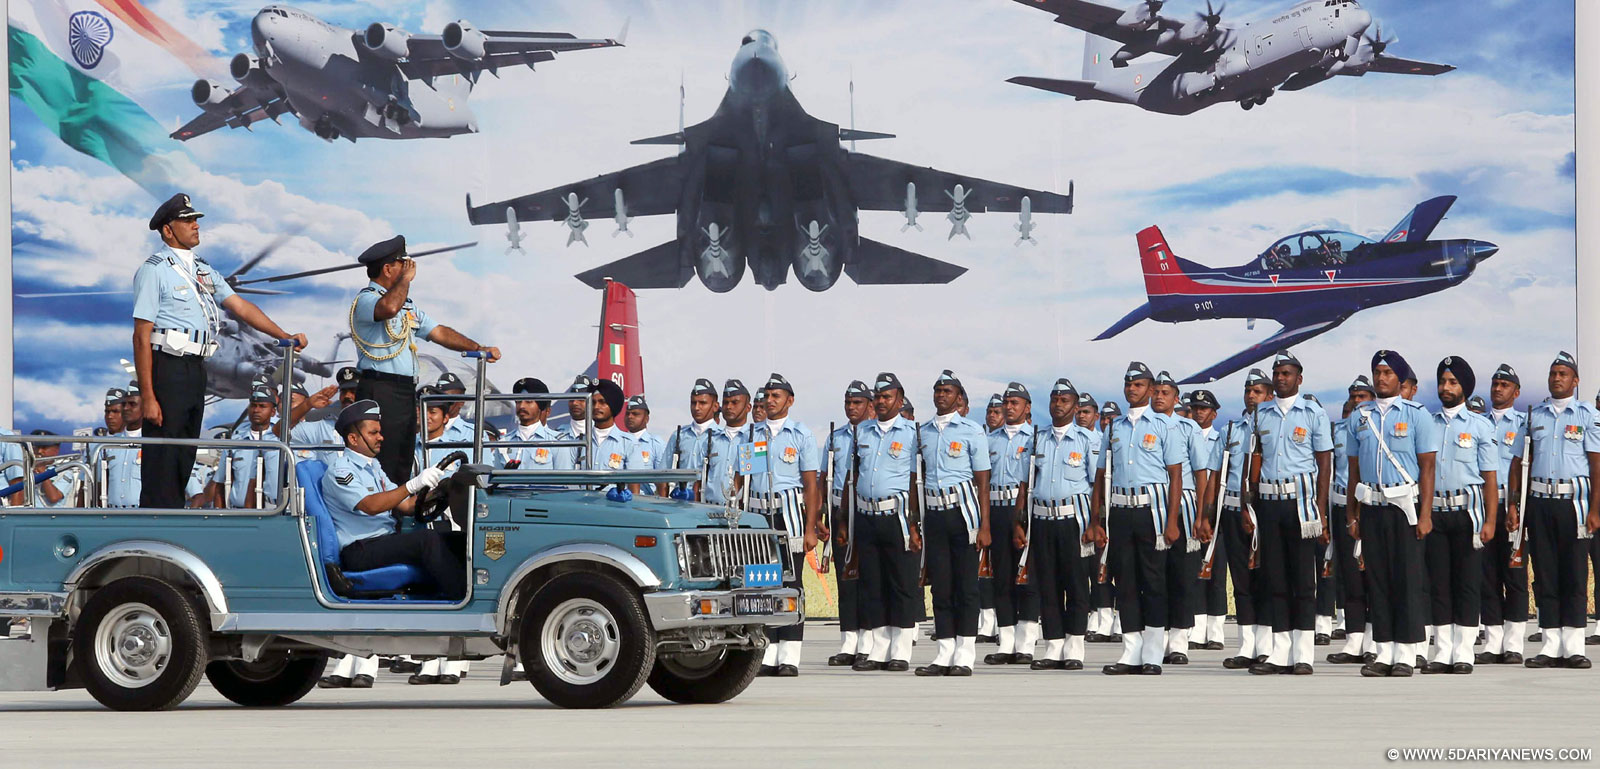 The Chief of the Air Staff, Air Chief Marshal Arup Raha reviewing the parade during Air Force Day Parade, at Air Force Station Hindan, in Ghaziabad on October 08, 2015